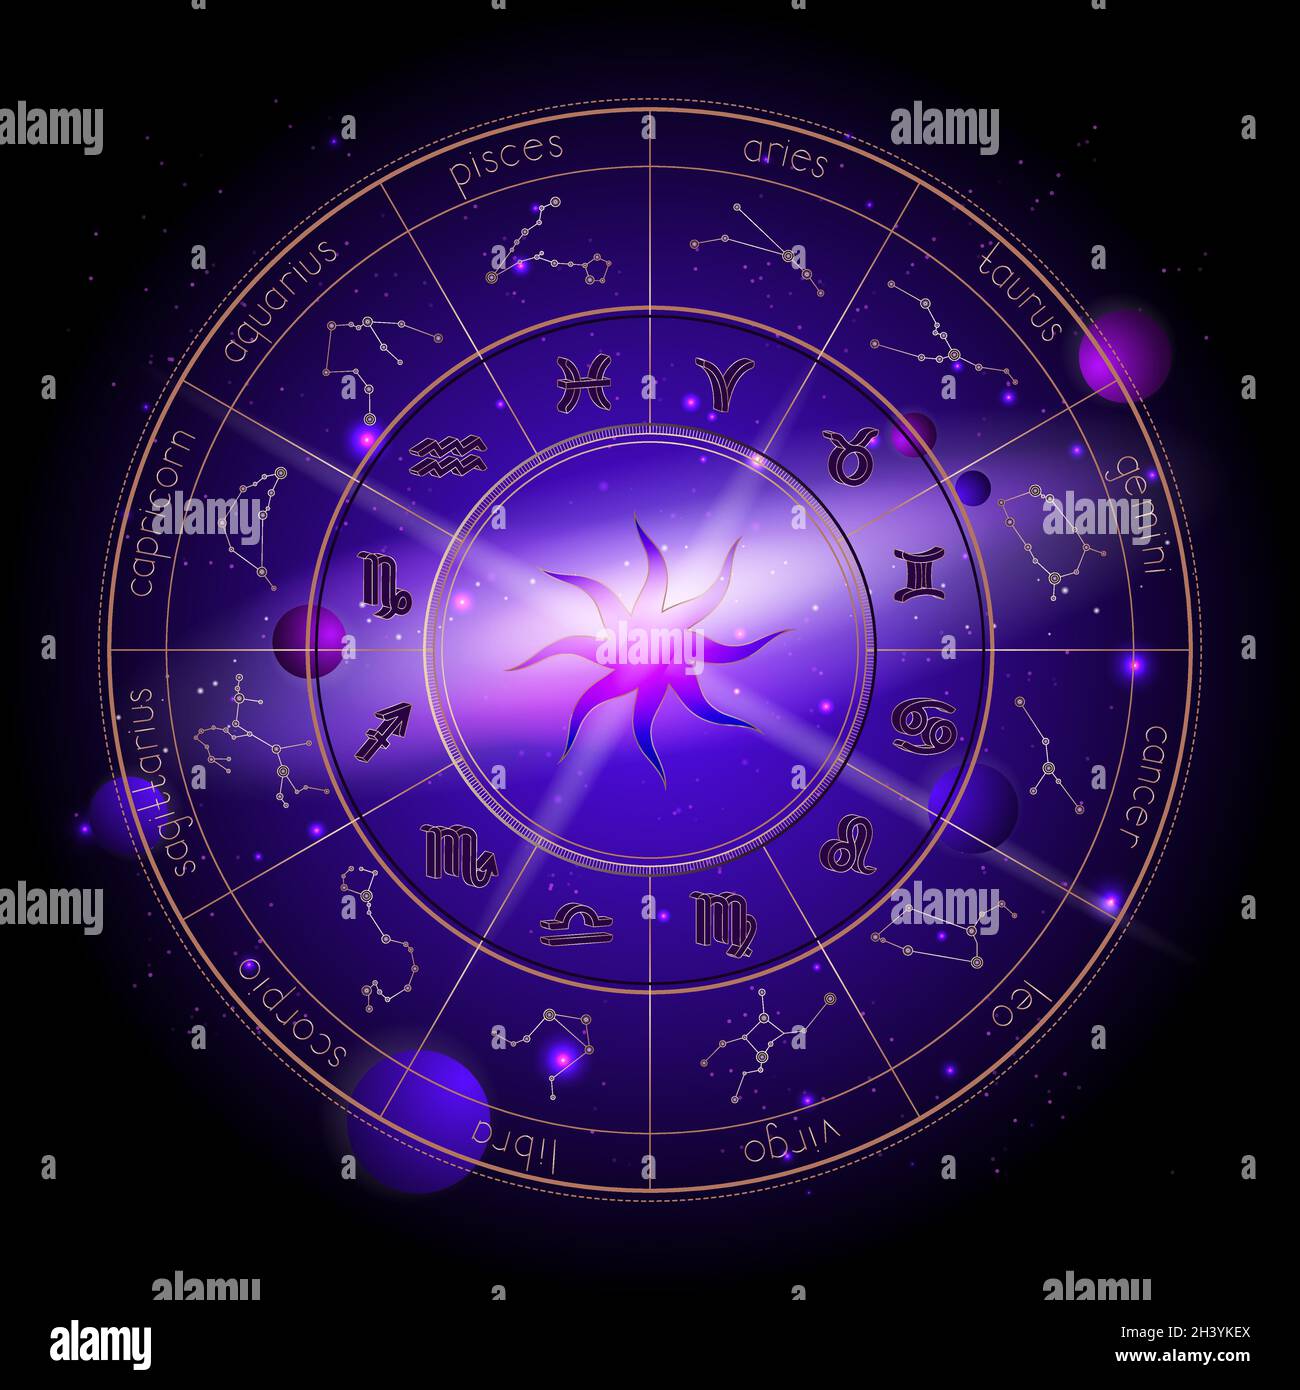 Vector illustration of Horoscope circle, Zodiac signs and pictograms astrology planets against the space background with planets, stars and geometry p Stock Vector